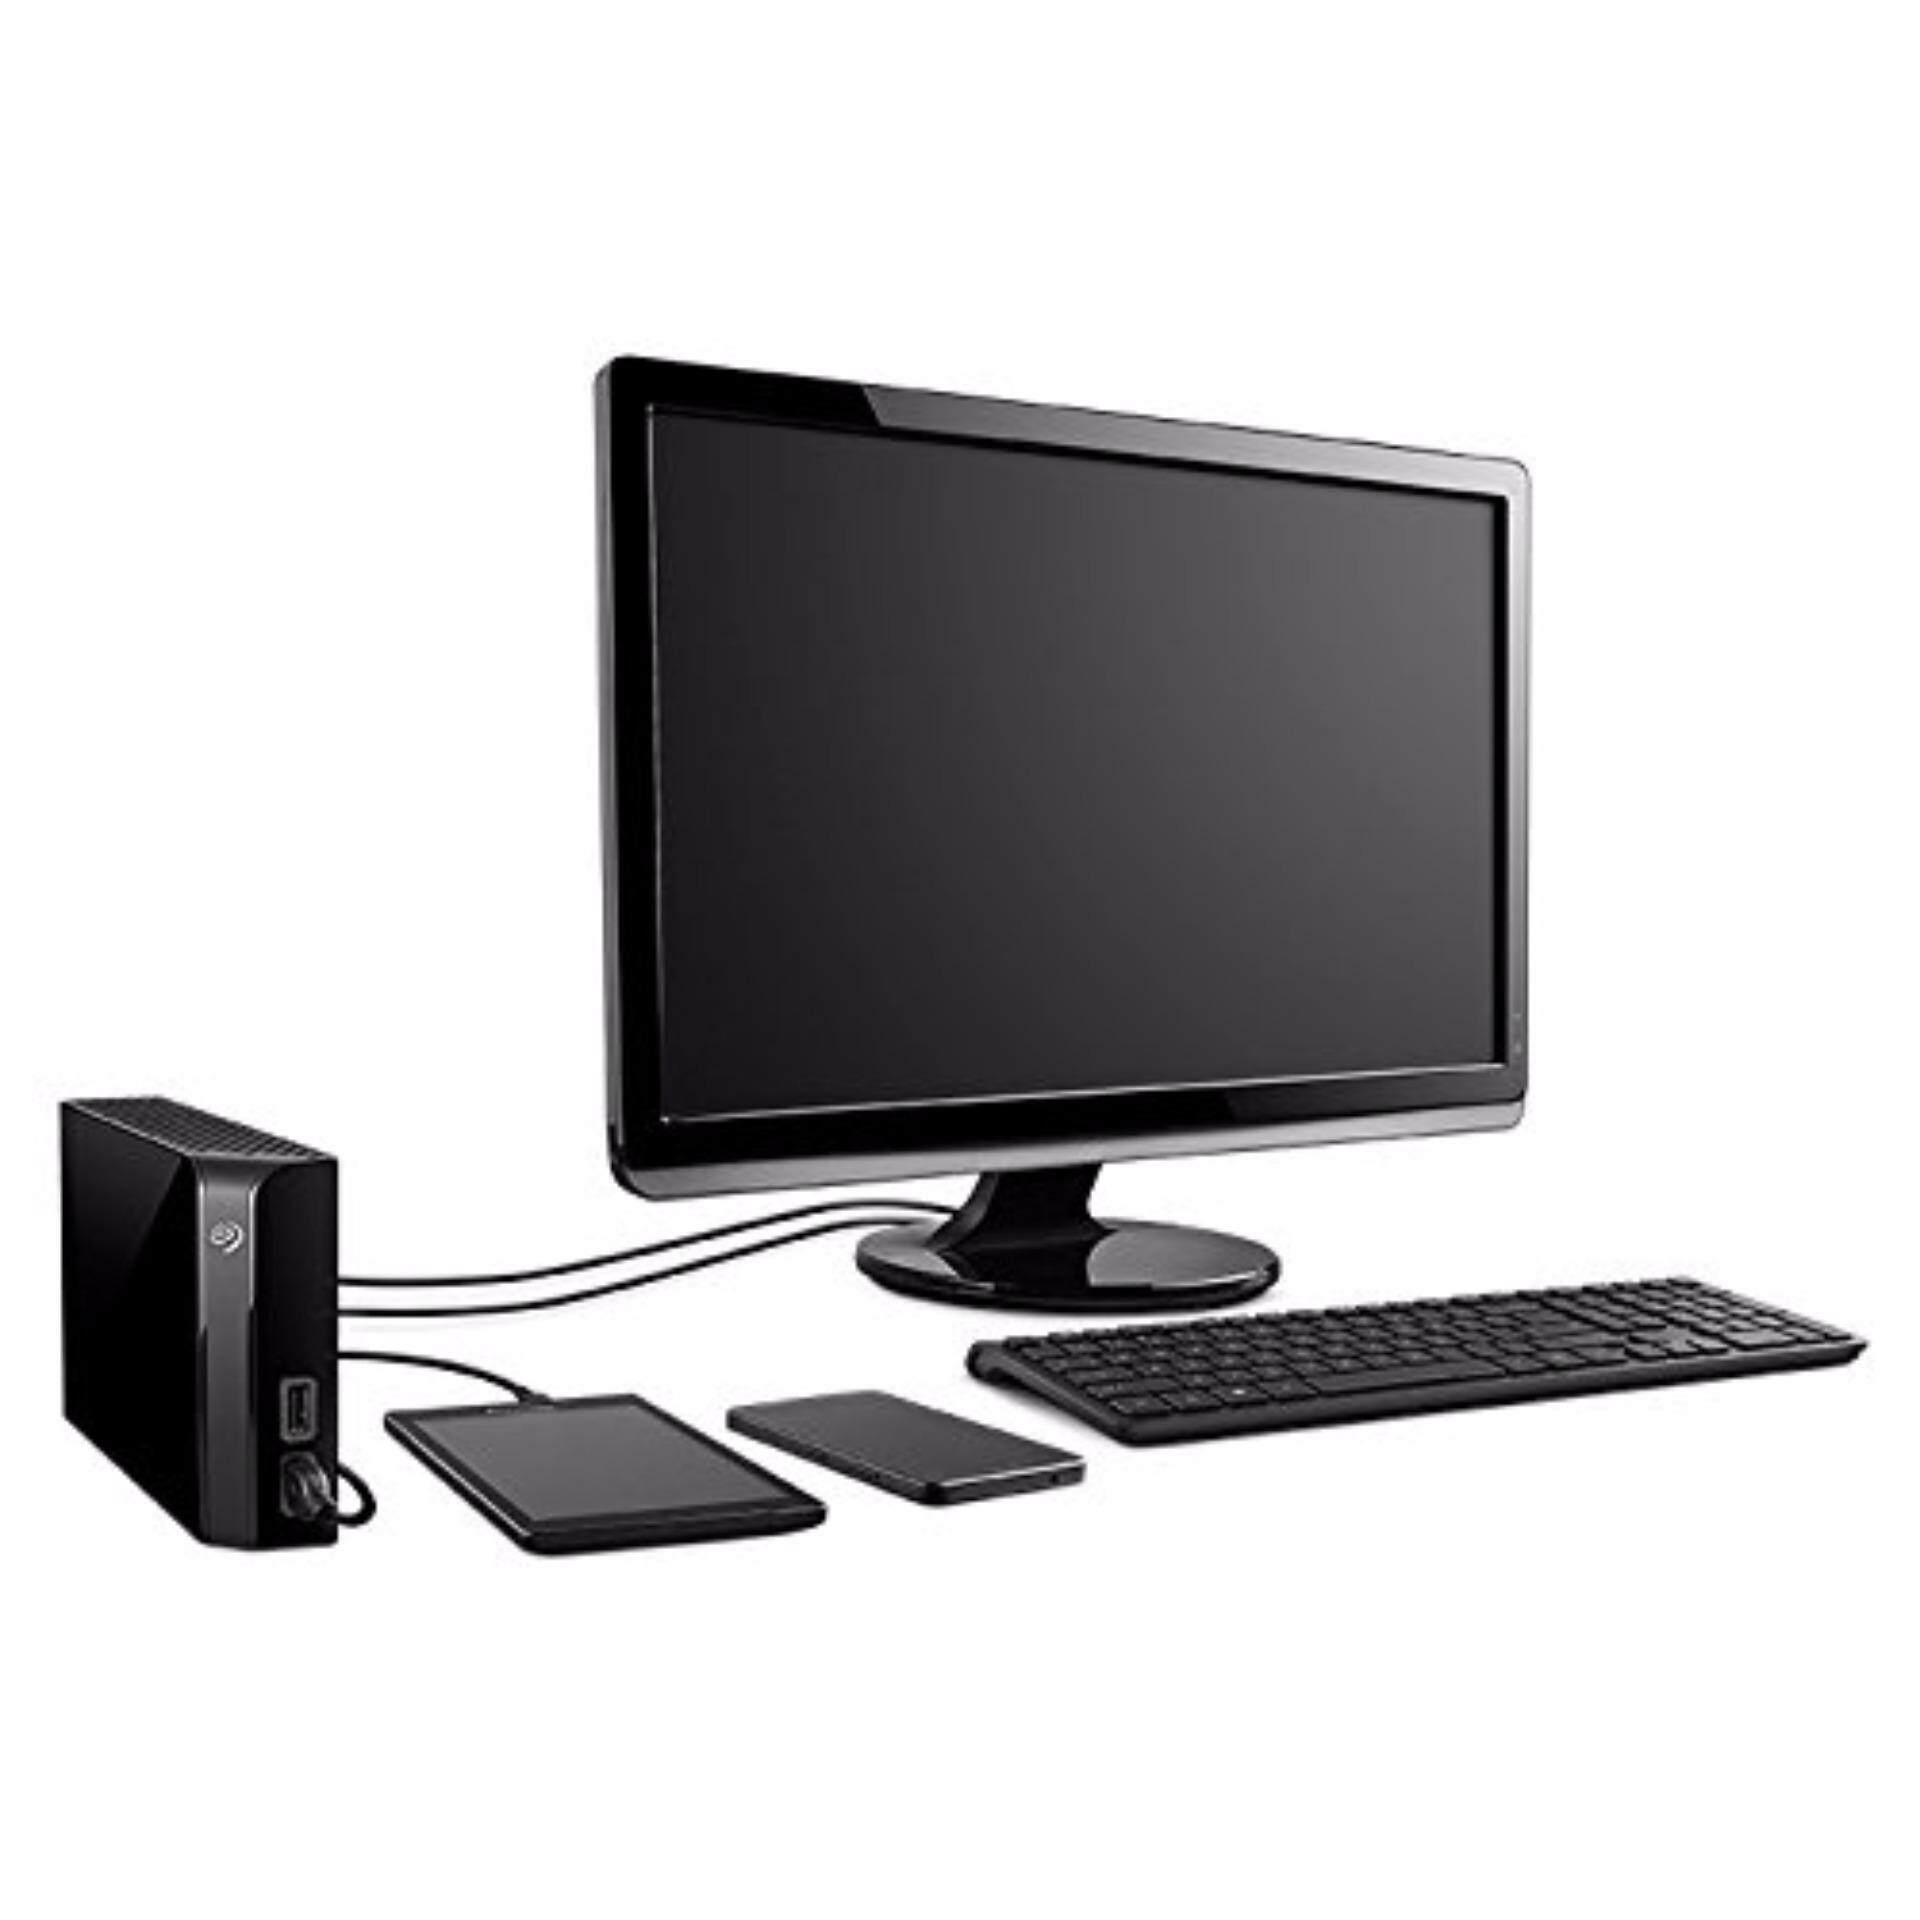 Seagate Backup Plus Desktop Hub 14TB (Up to 160 MB/s) with Integrated USB 3.0 Back up & Charge Hub Downloadable Seagate Backup Software Mac & Windows Compatible external hard disk